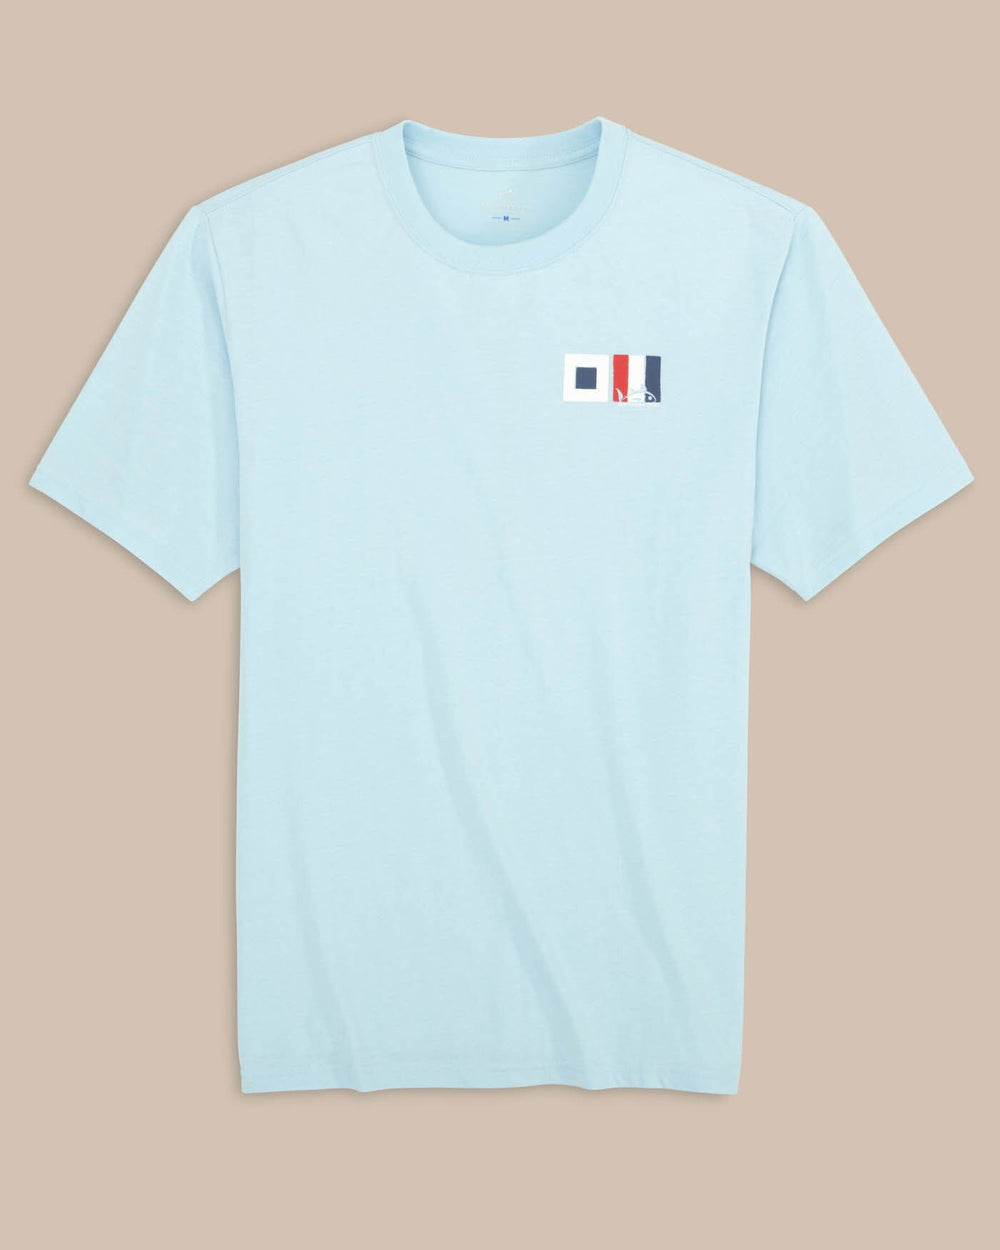 The front view of the Southern Tide ST Flag Left Chest Short Sleeve T-Shirt by Southern Tide - Chilled Blue